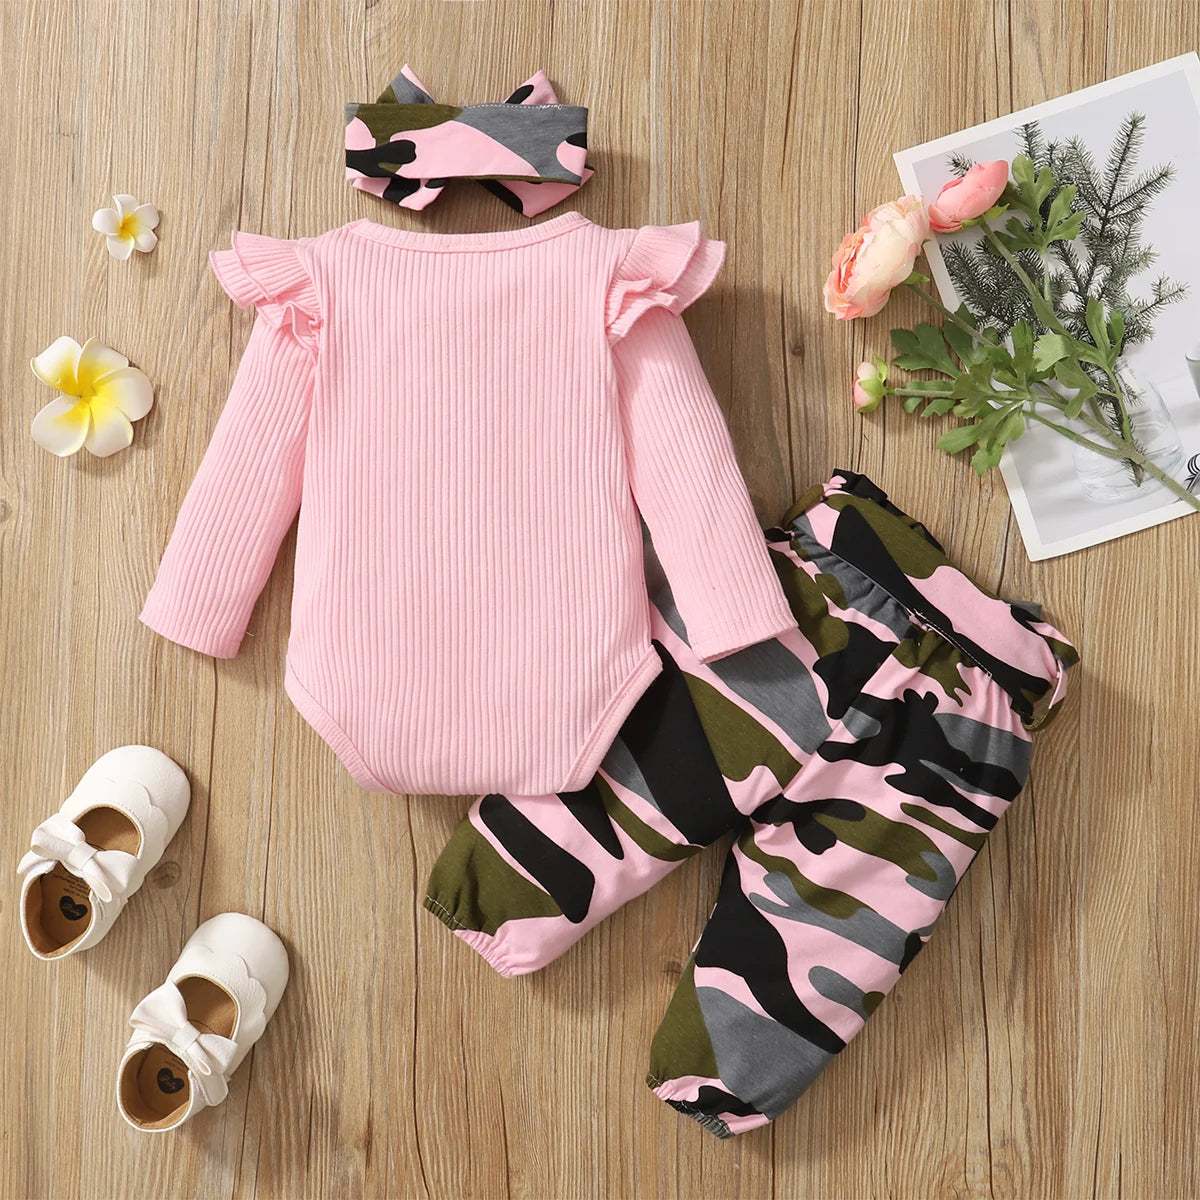 Newborn Baby Girl Clothes Set | Long Sleeve Bodysuit + Camouflage Pants + Headband | Cotton Clothing Suit | Ages 0-18 Months